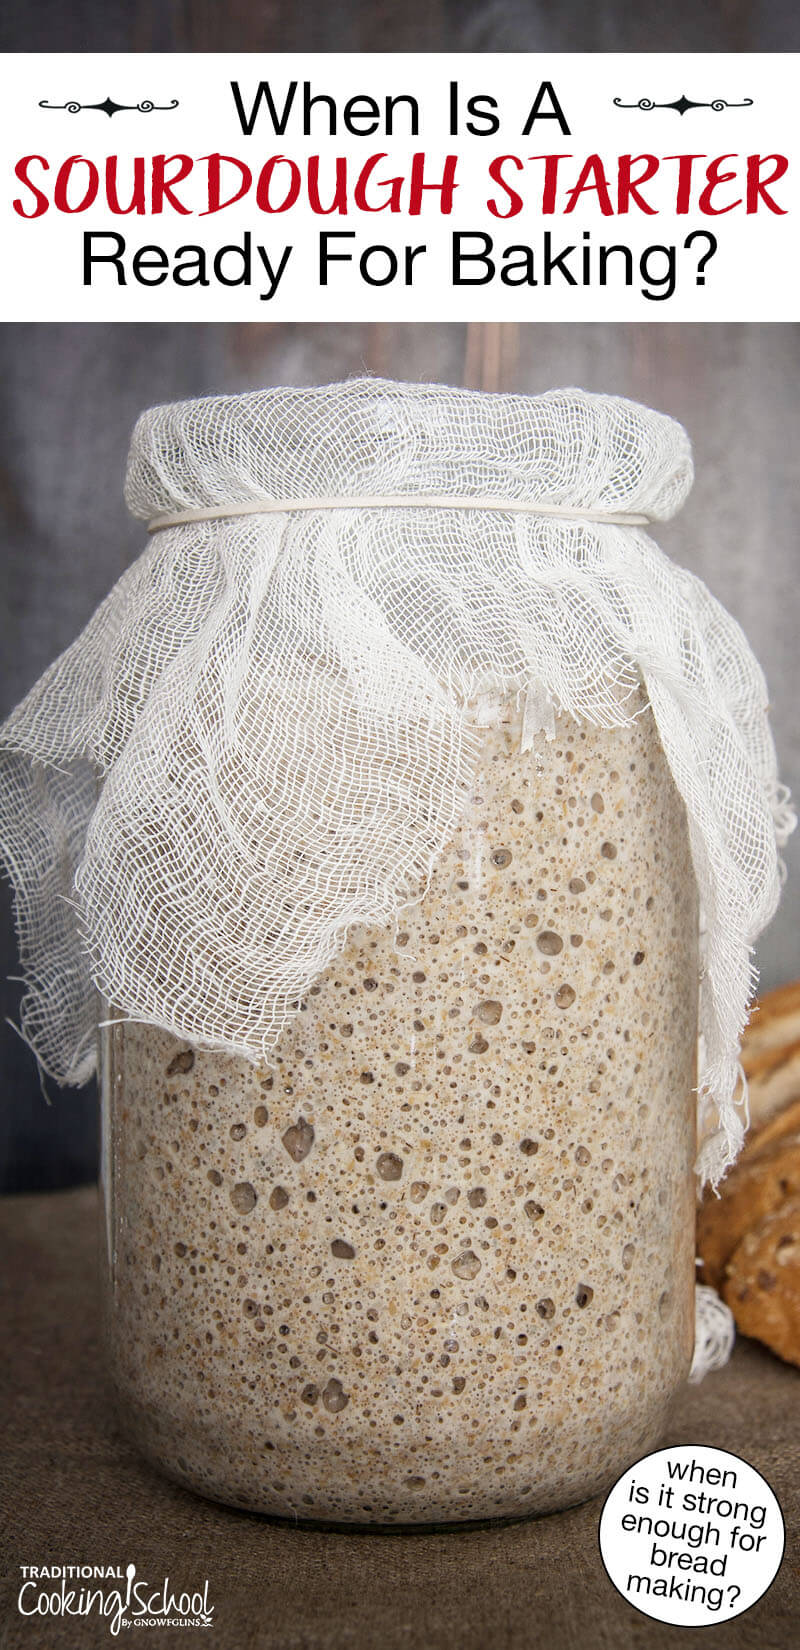 Bubbly sourdough starter in a large jar covered with gauze. Text overlay says: "When Is A Sourdough Starter Ready For Baking? (when is it strong enough for bread making?)"